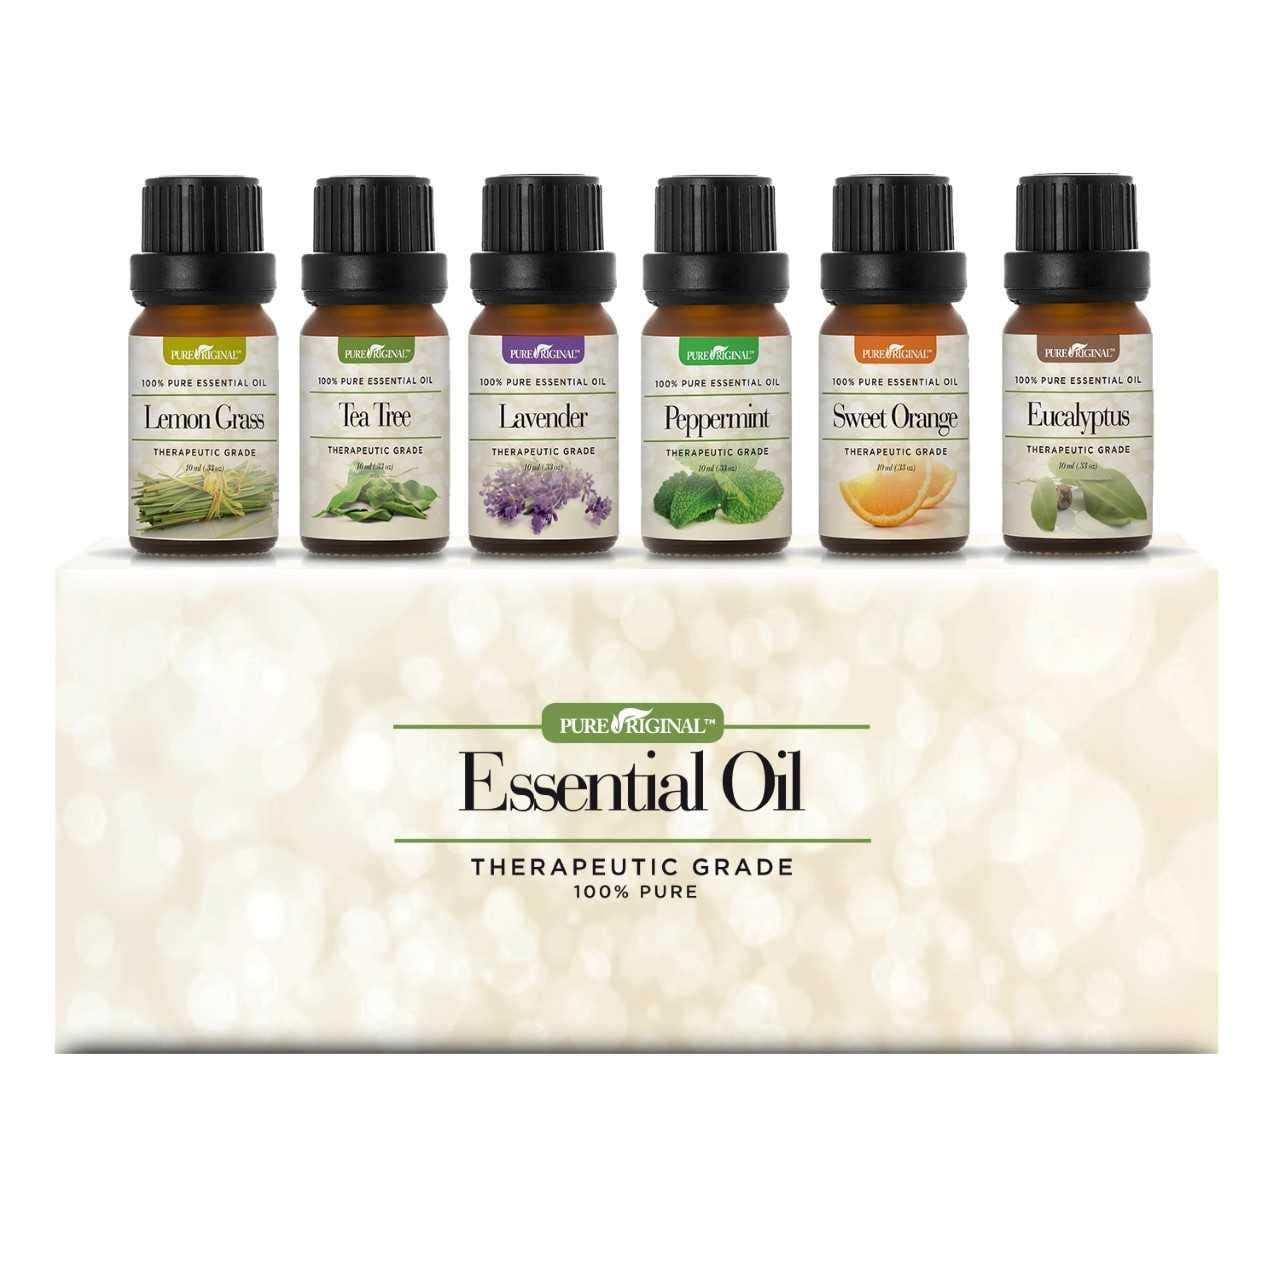 10 Reasons To Use Therapeutic-Grade Essential Oils - The Center for Family  Unity